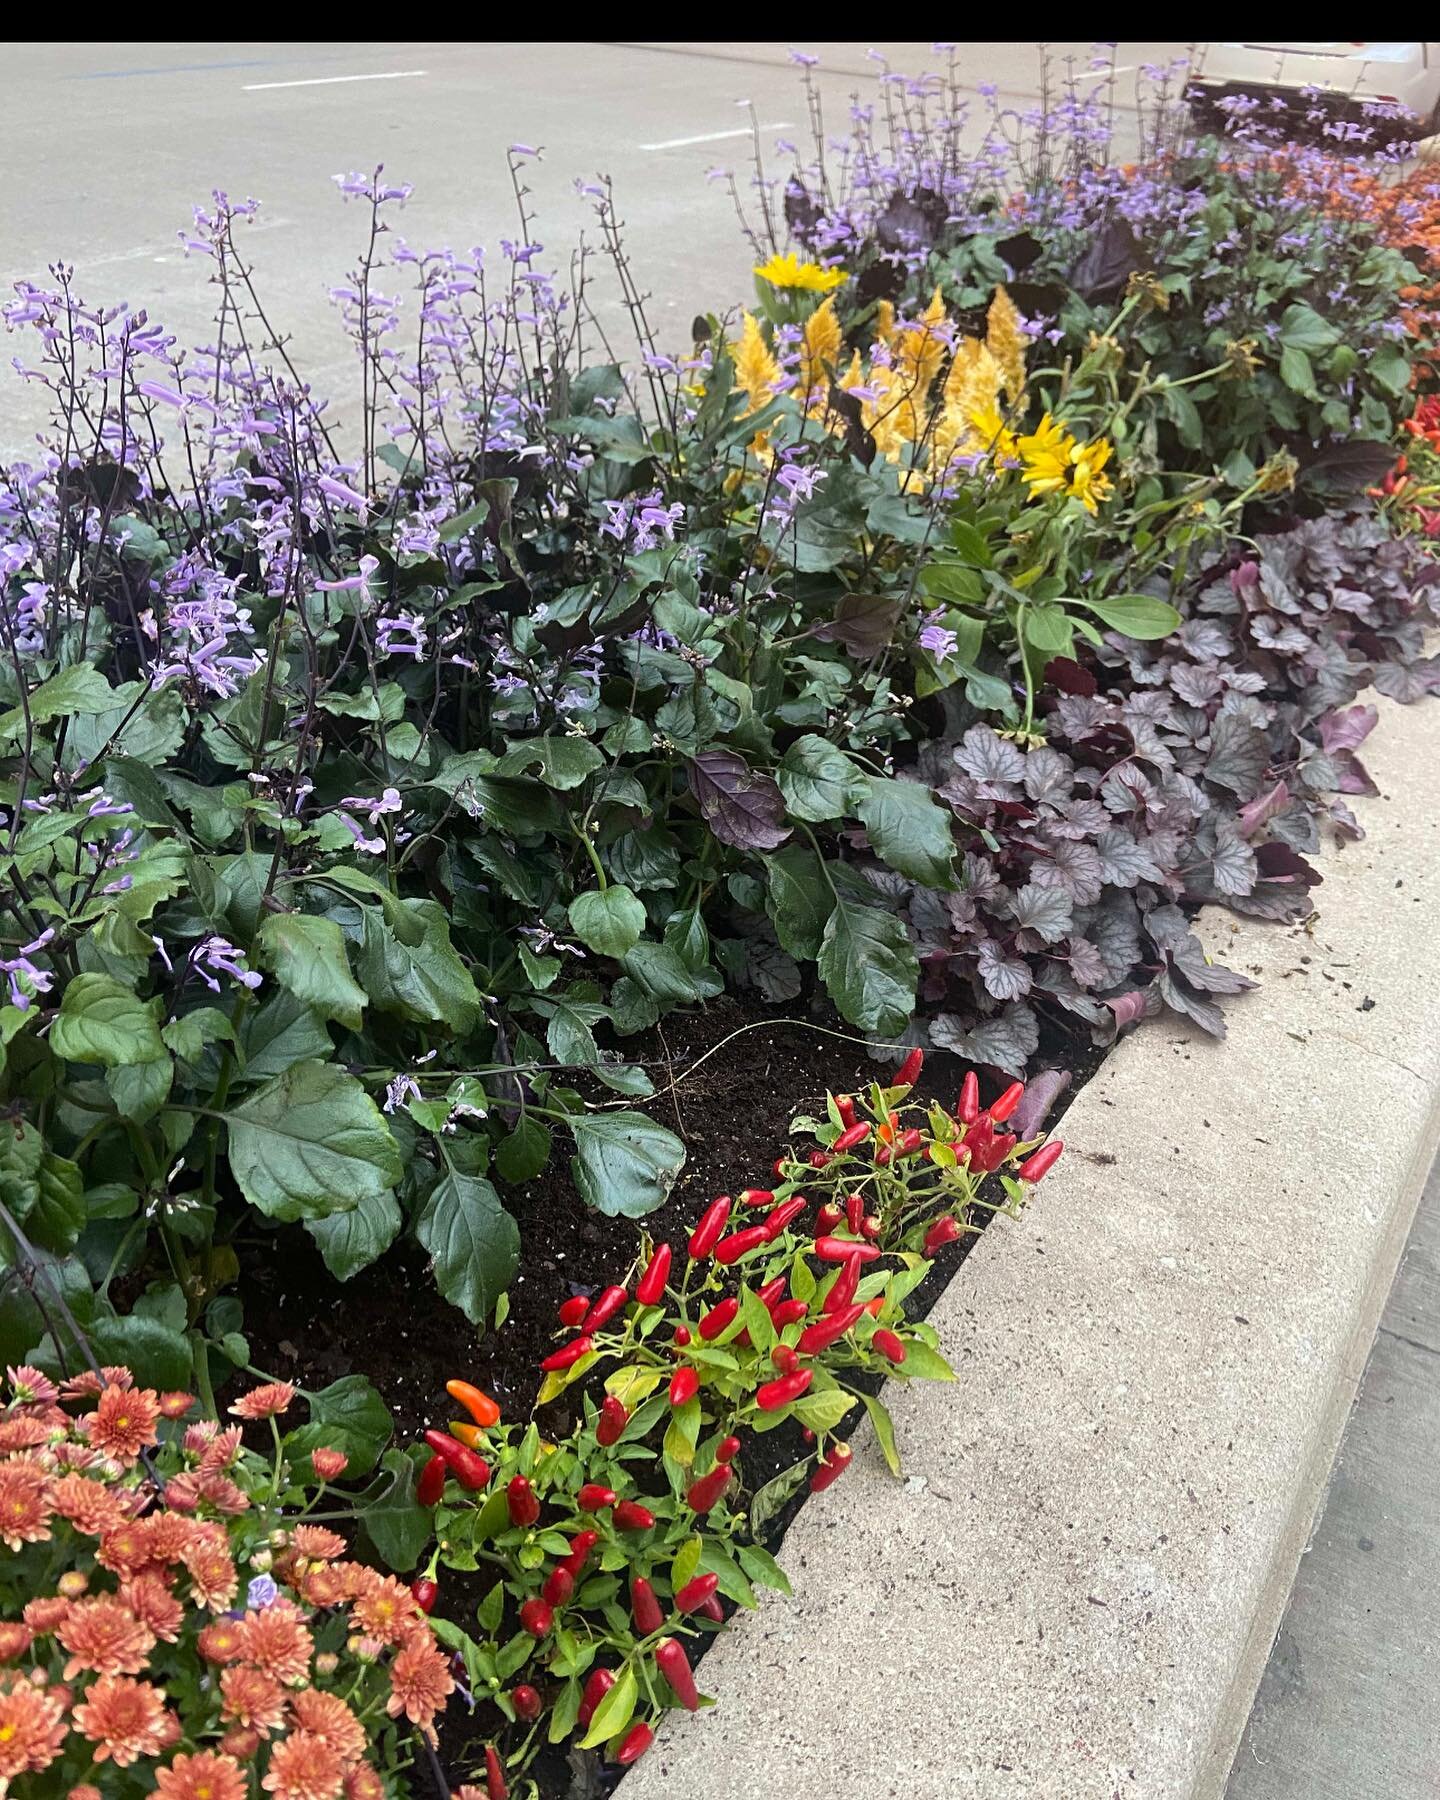 Step back. Fall color.

#planter #parkway #wackerdrive #chicagoplants #fallcolor #fallplants #chicagofall